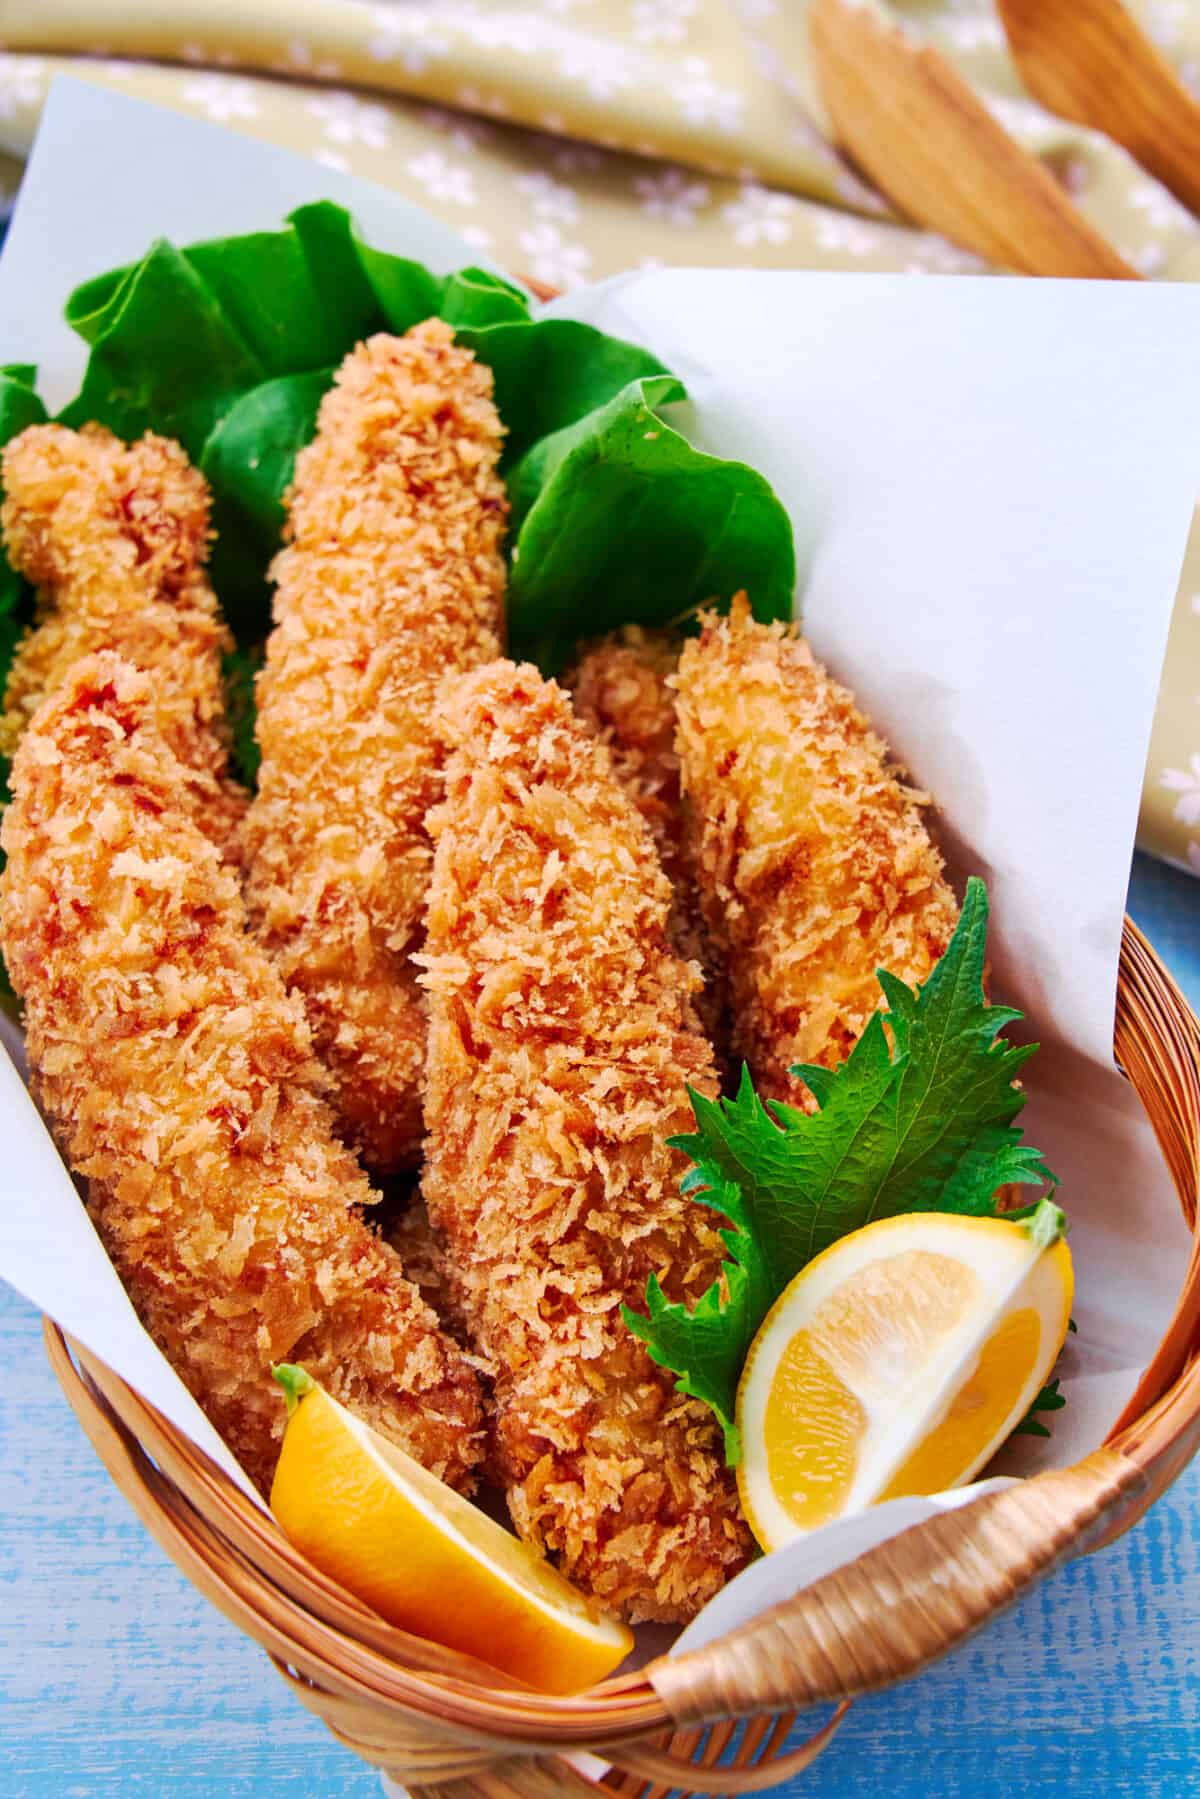 These juicy marinated chicken tenders coated in crispy panko are a Japanese favorite.